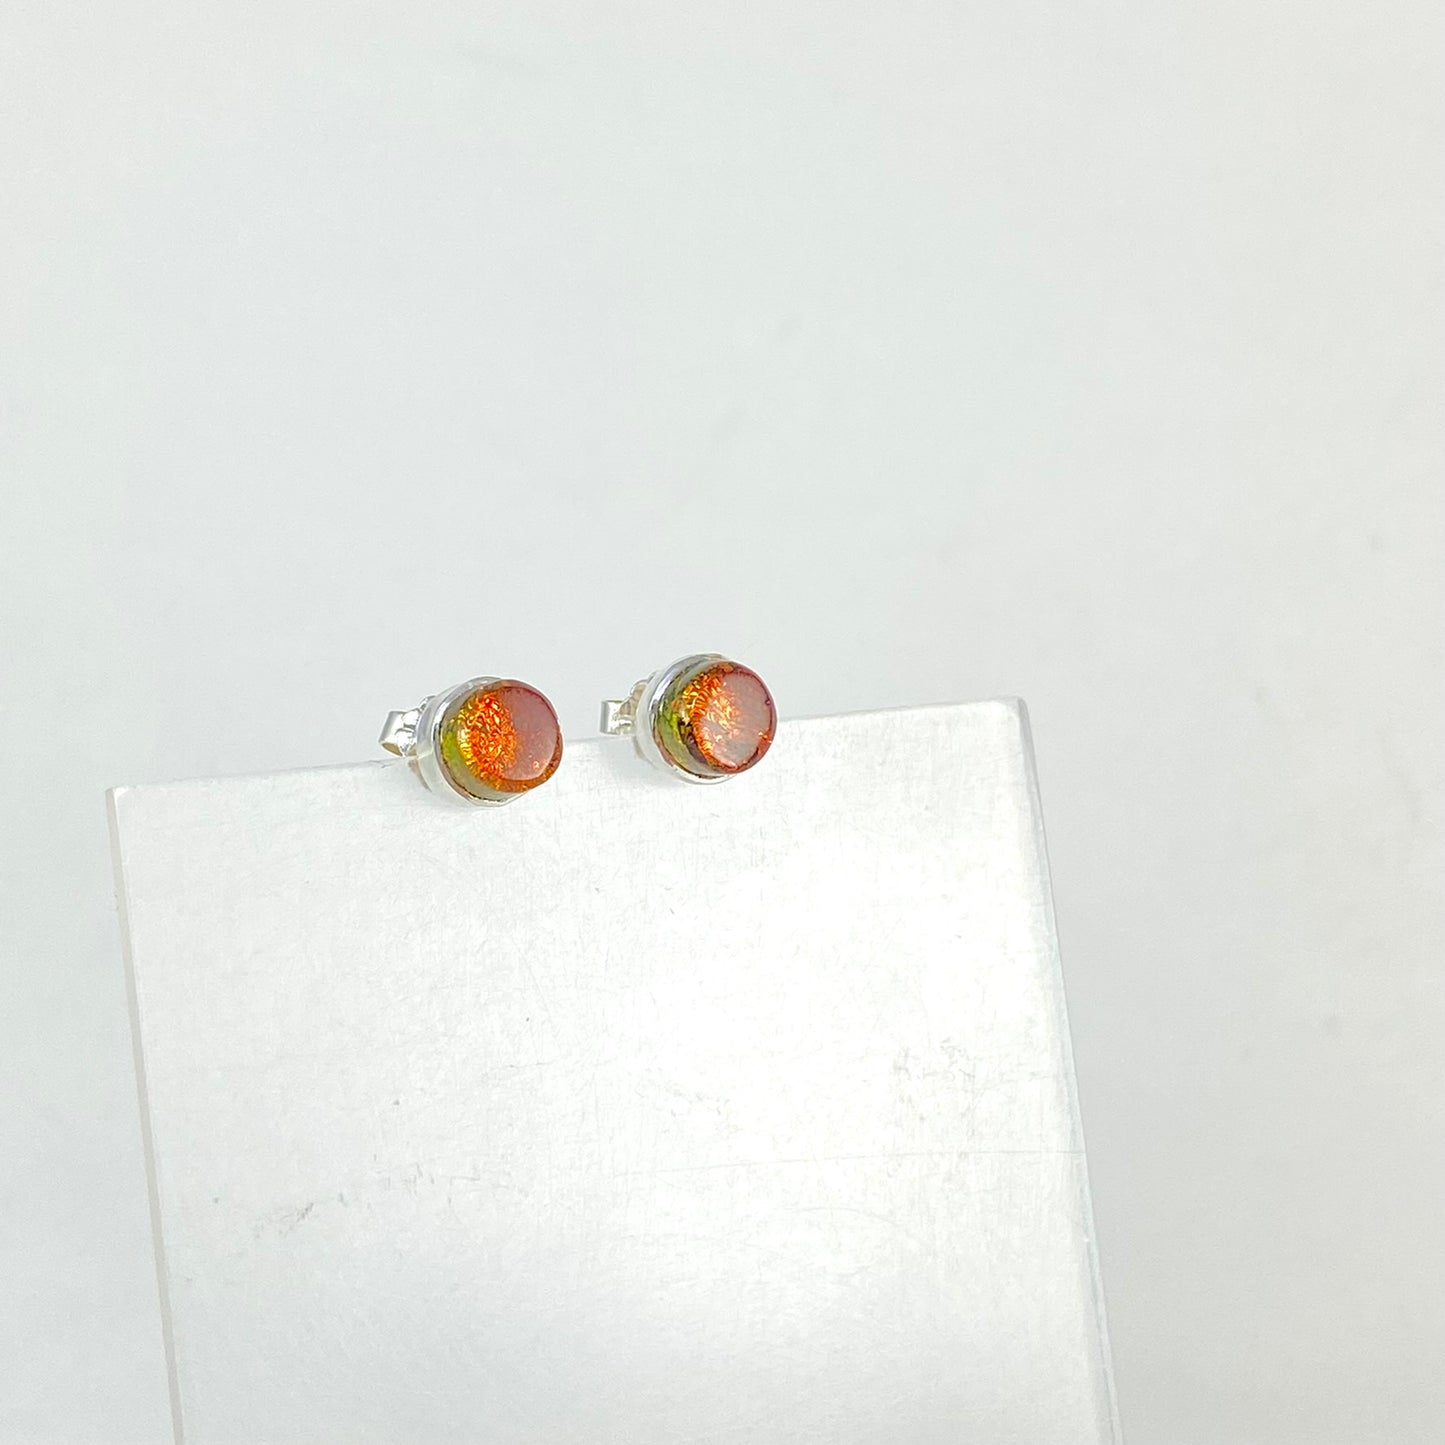 Tiny Circle Post Earrings in Amber